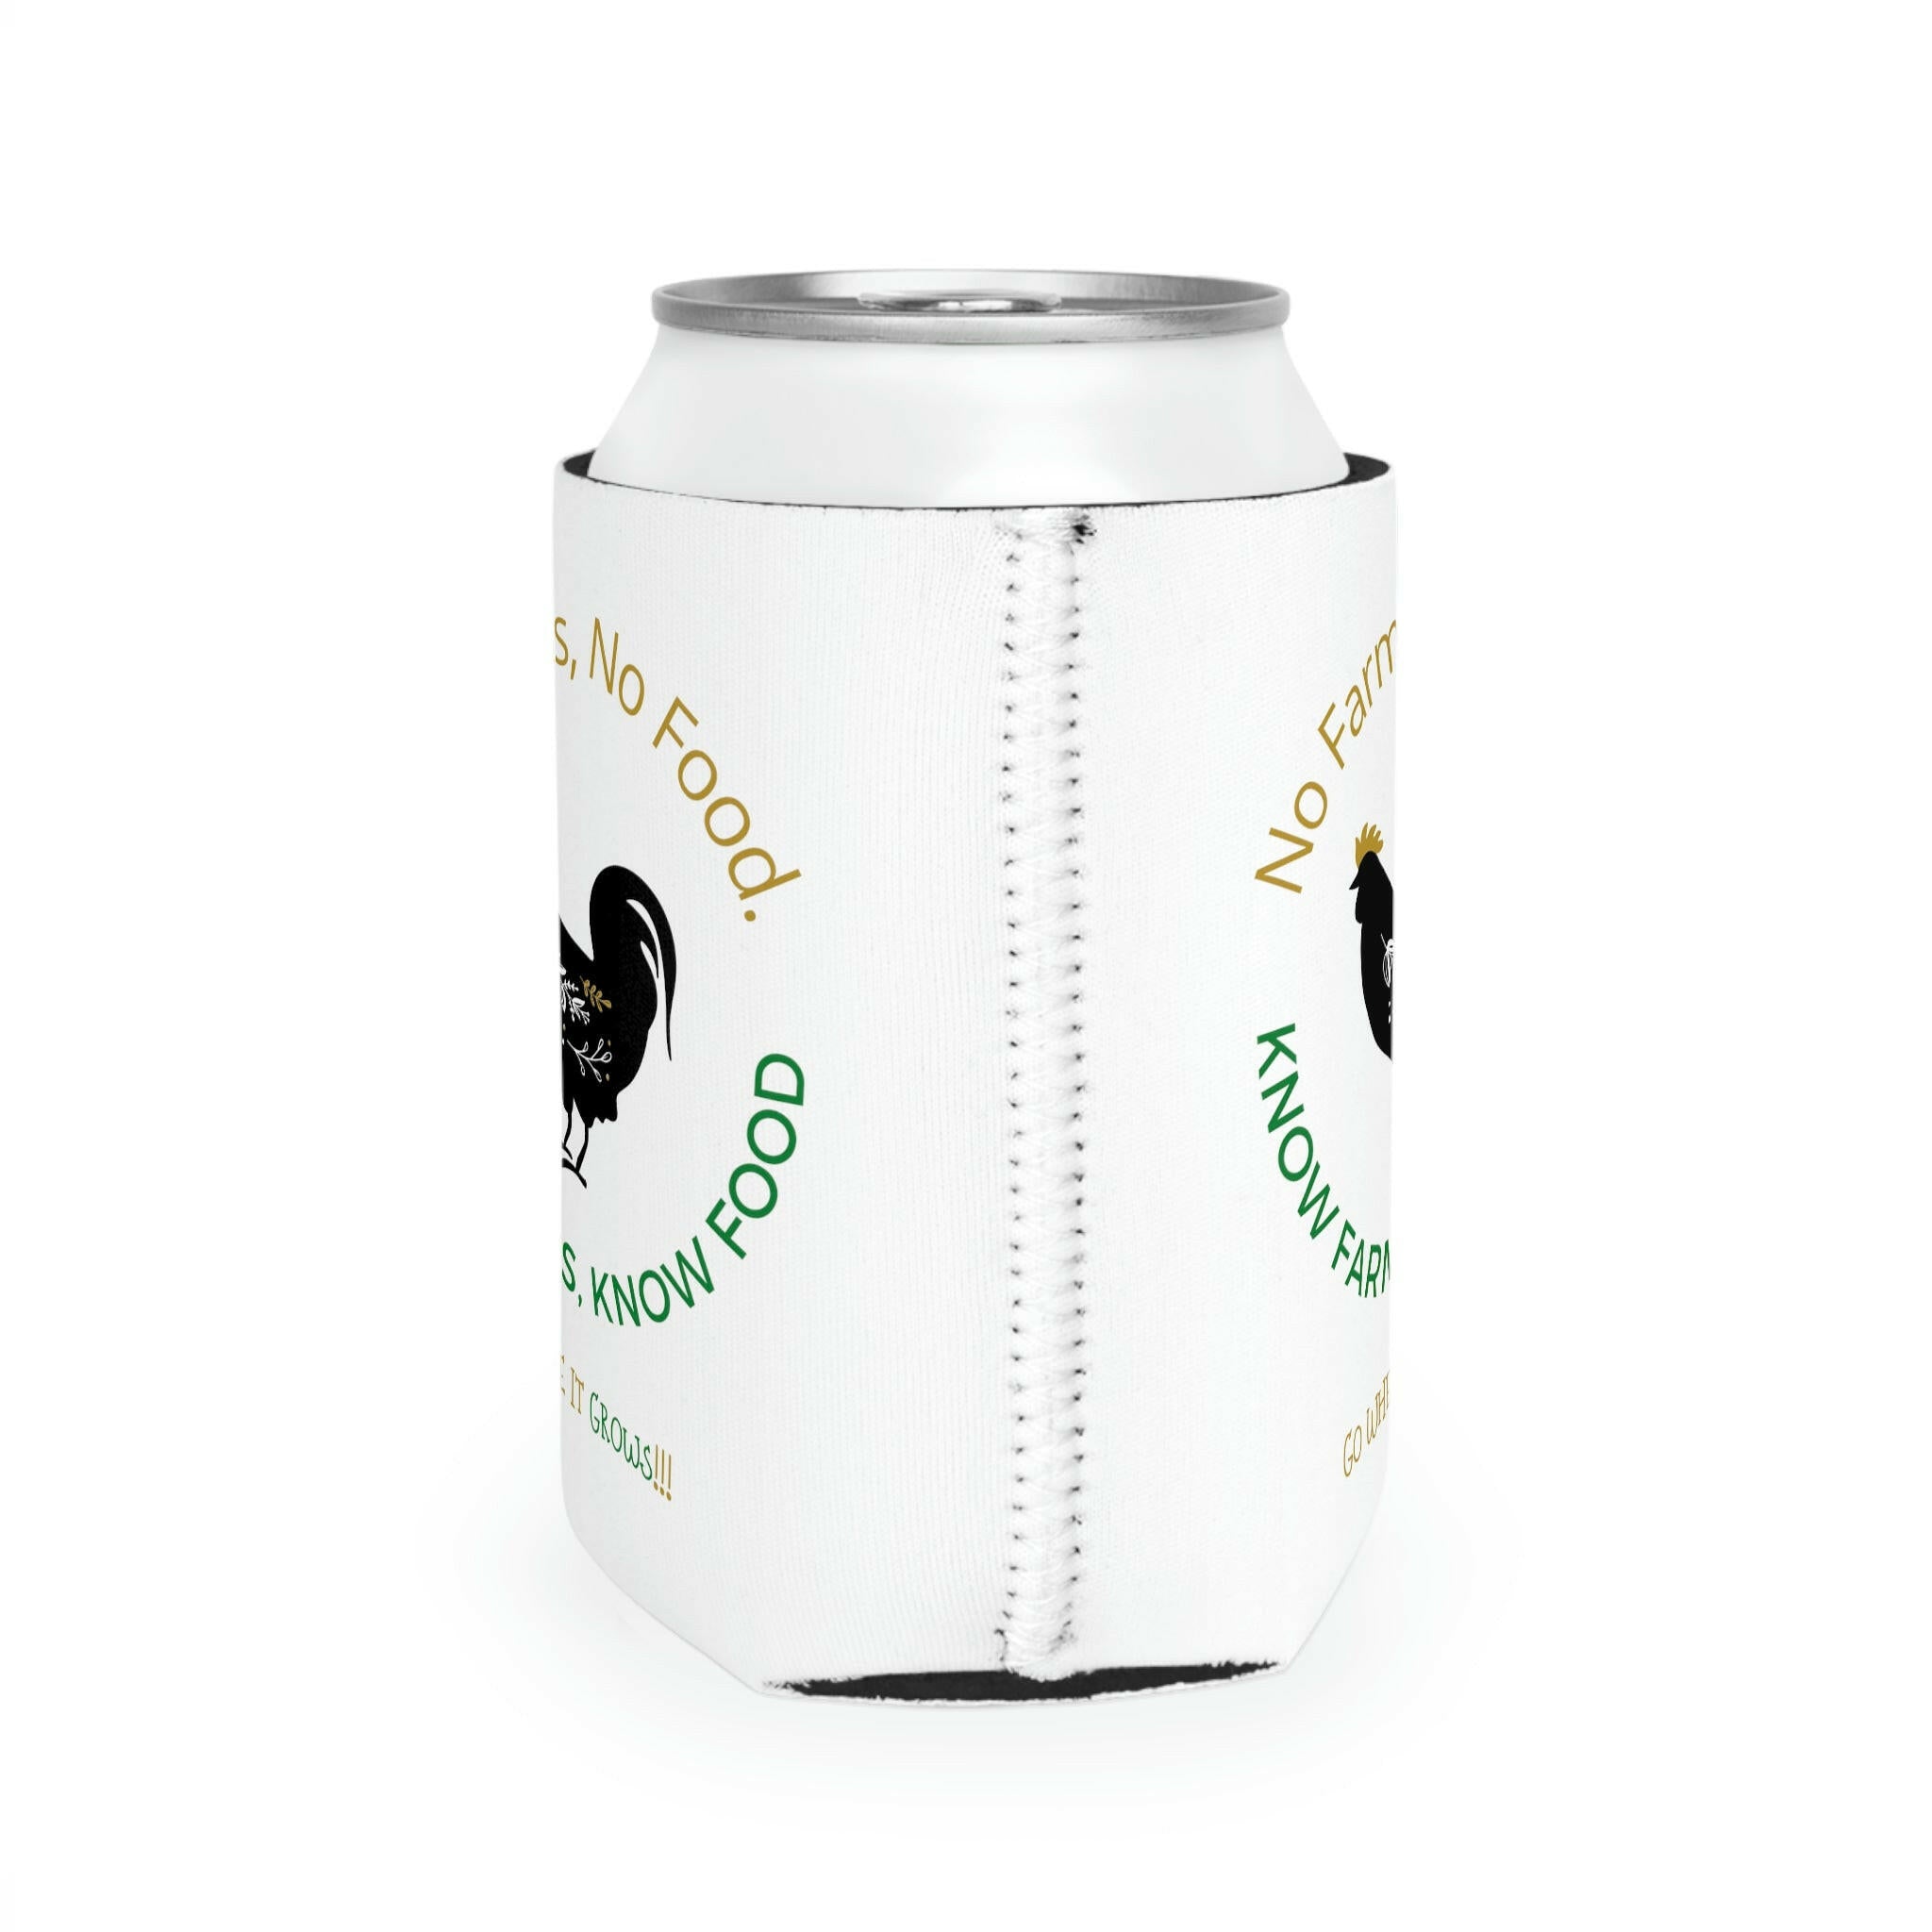 “No Farms, No Food” - Can Cooler Sleeve.